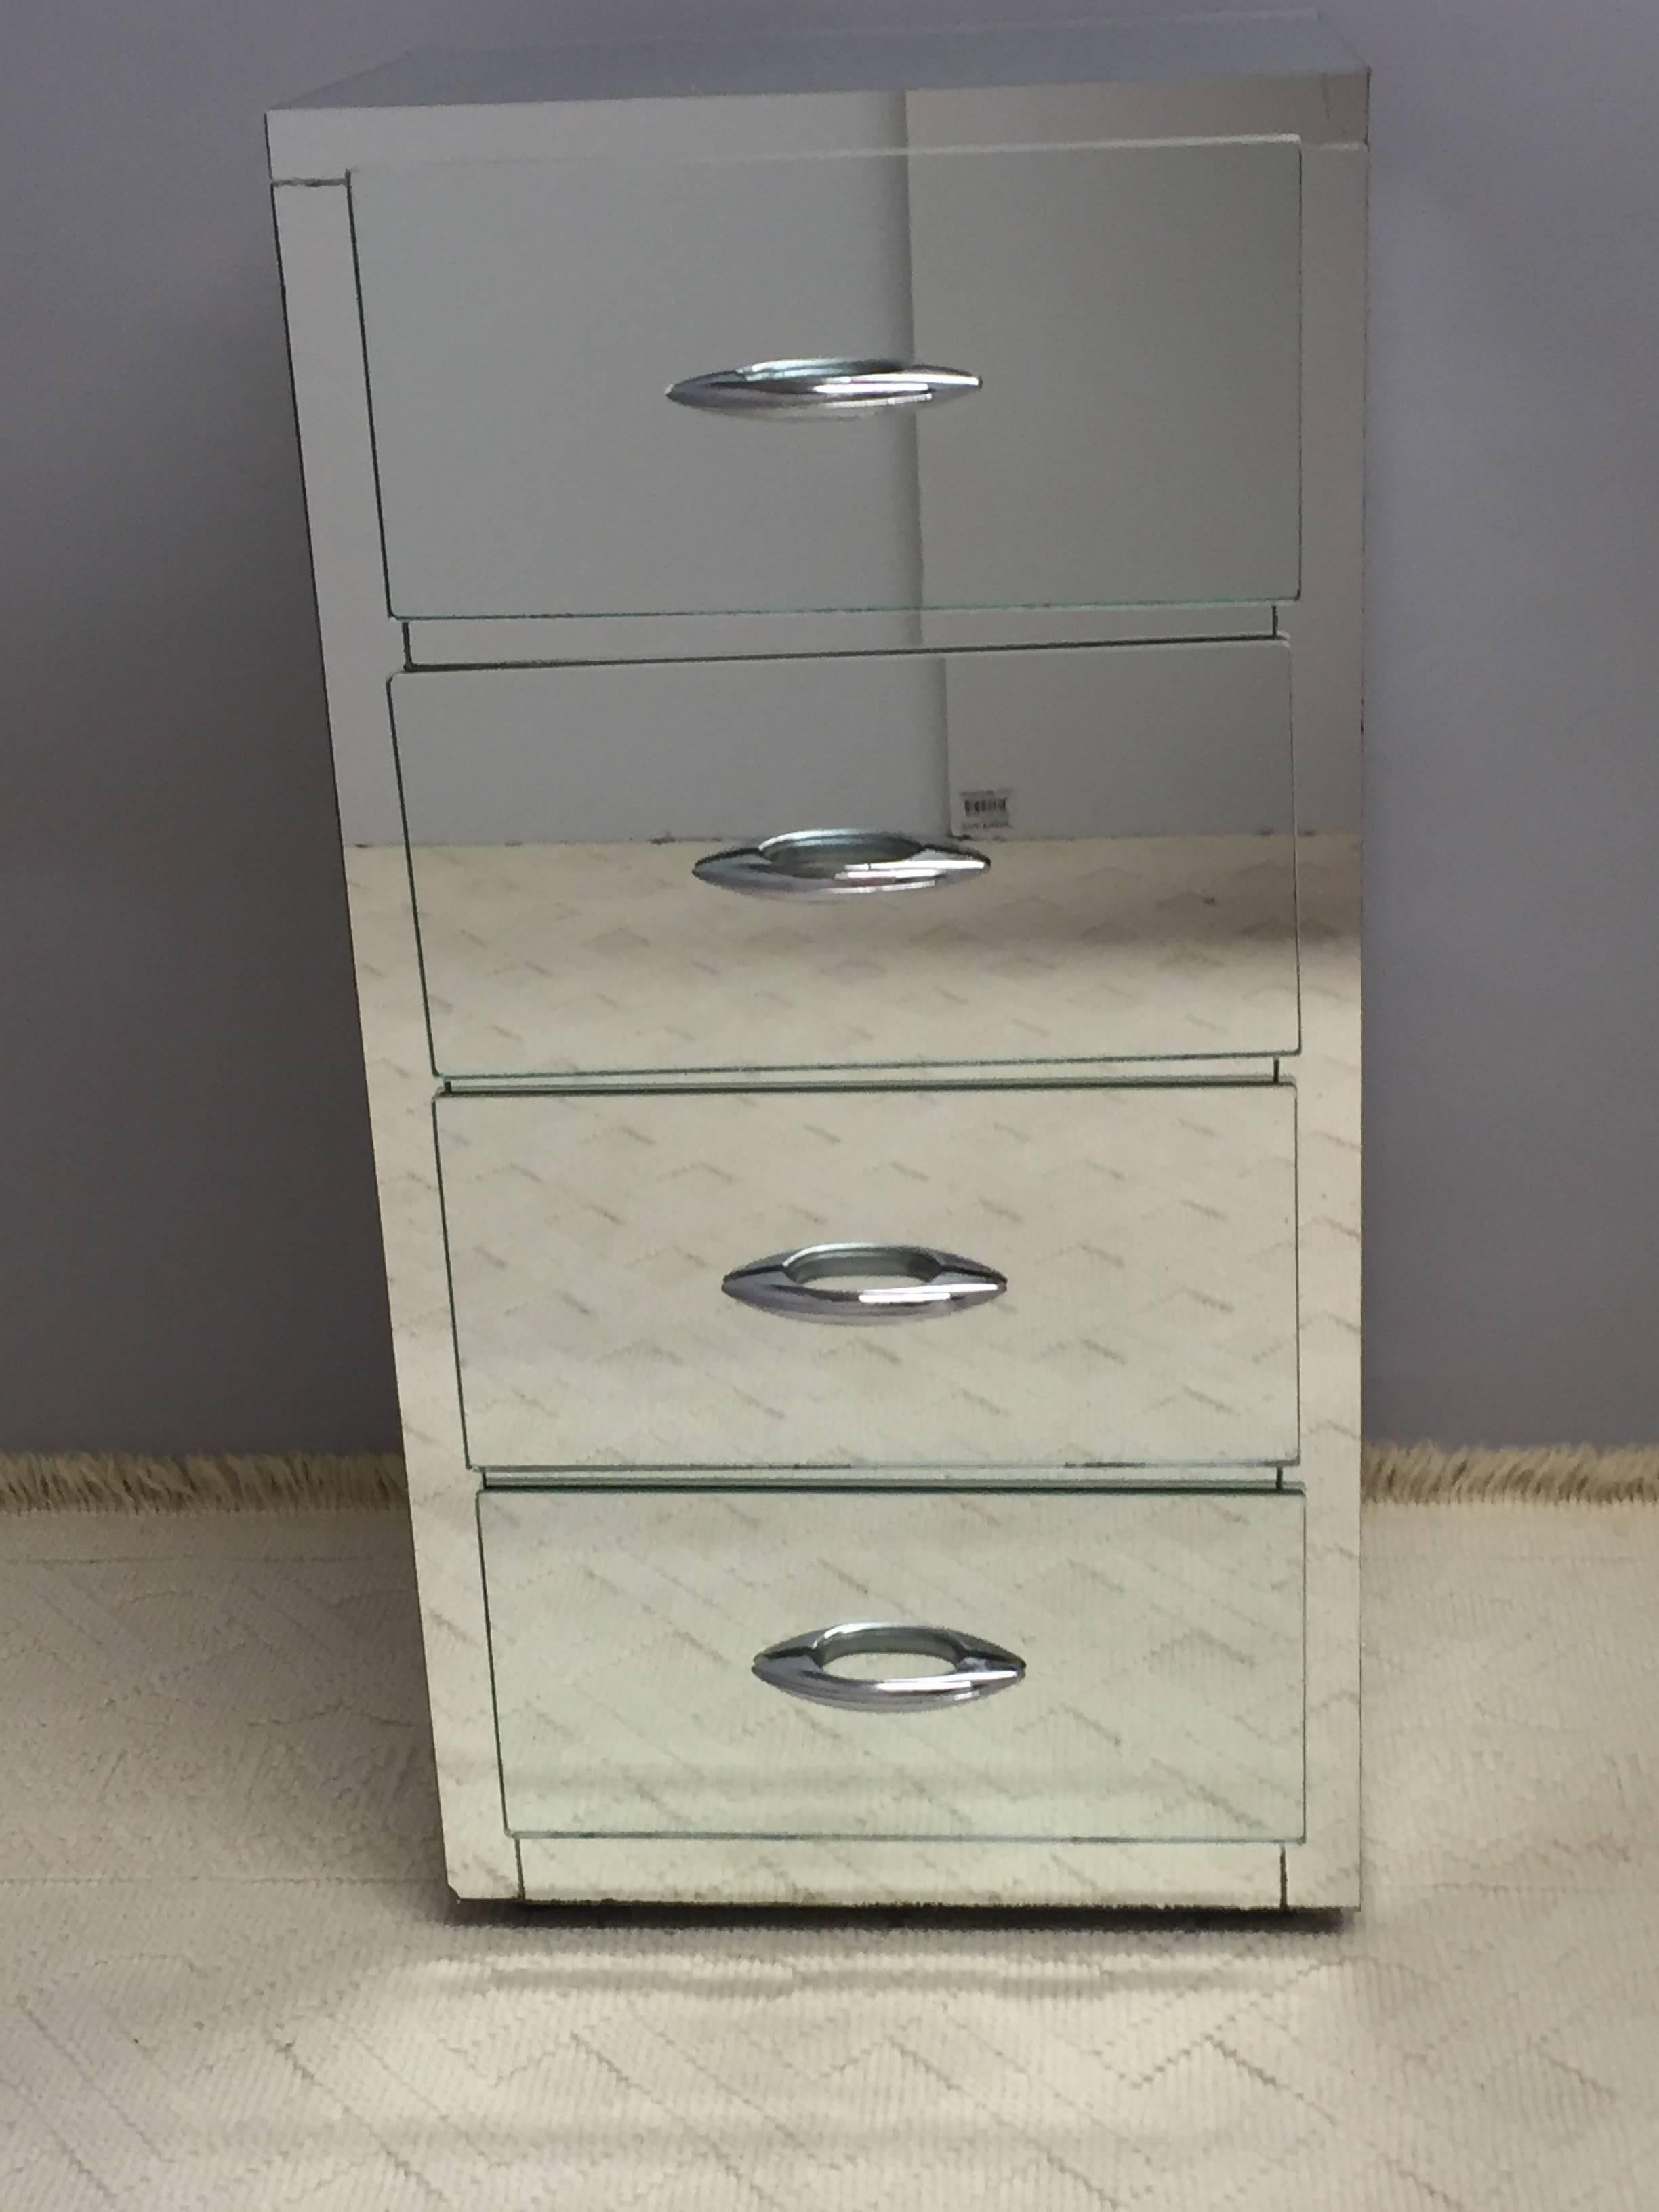 Mirrored narrow chest having four drawers and chrome covered brass hardware. Associated piece with a vanity also on our storefront. Mirrored on three sides; back is plain brown.

RR
 